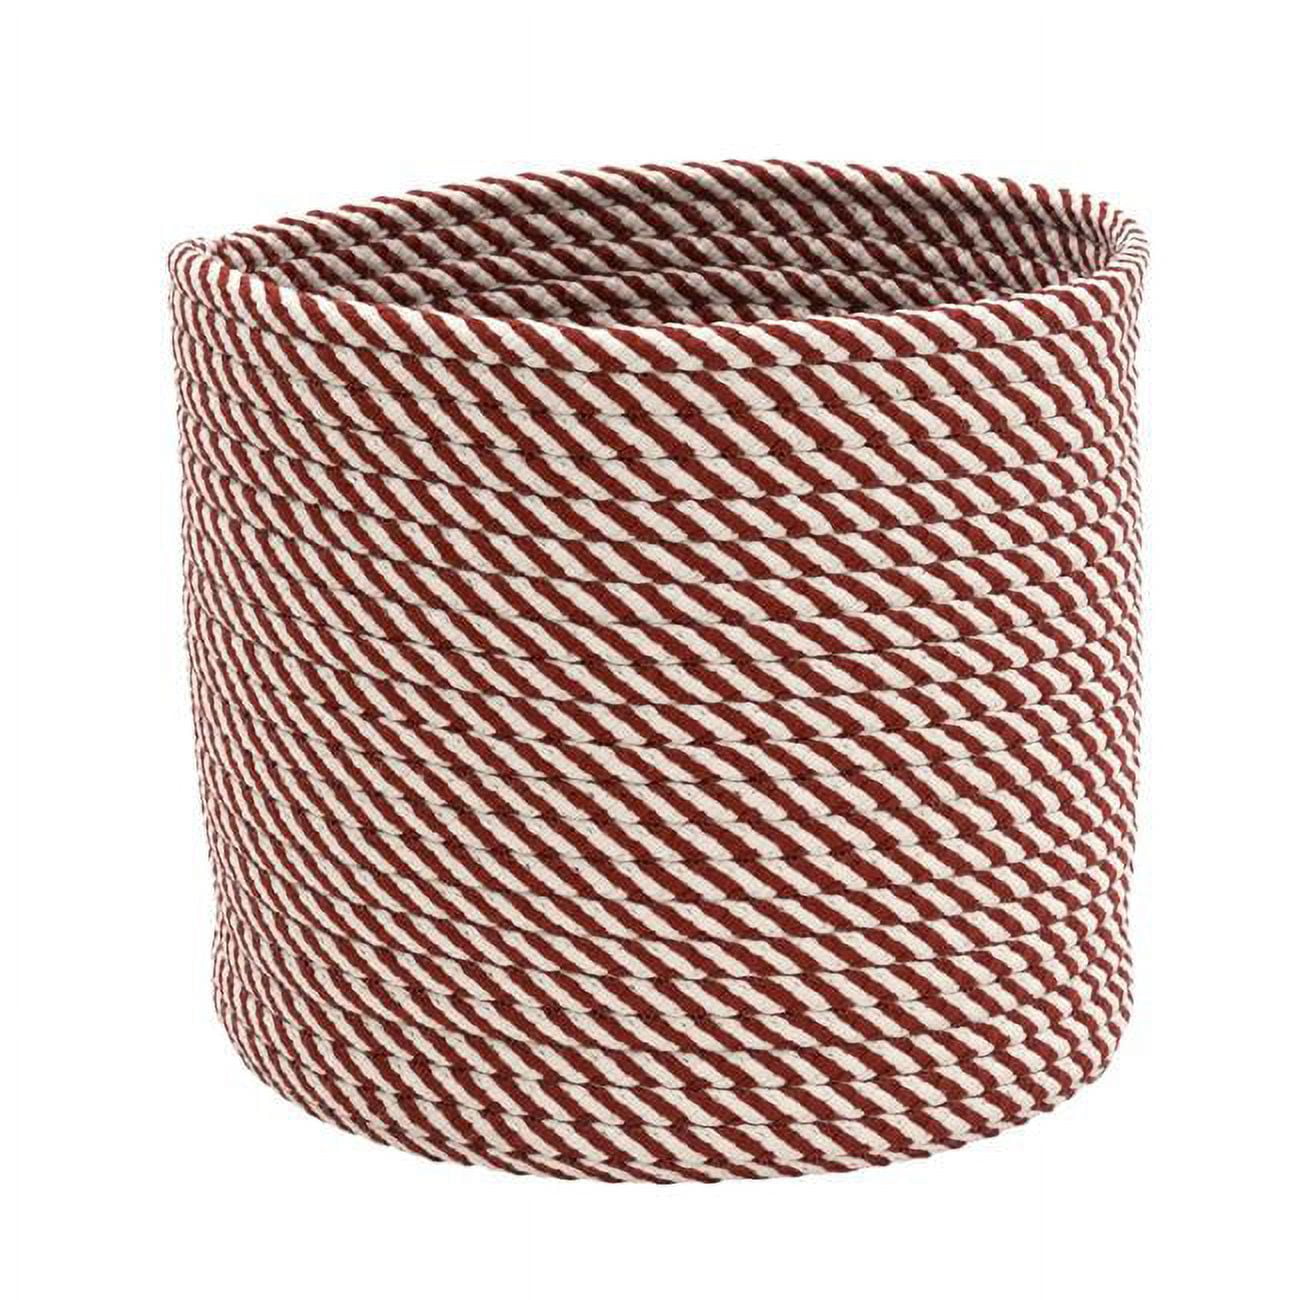 Picture of Colonial Mills BP14A012X010 12 x 12 x 10 in. Twisted Christmas Woven Basket - Red & White